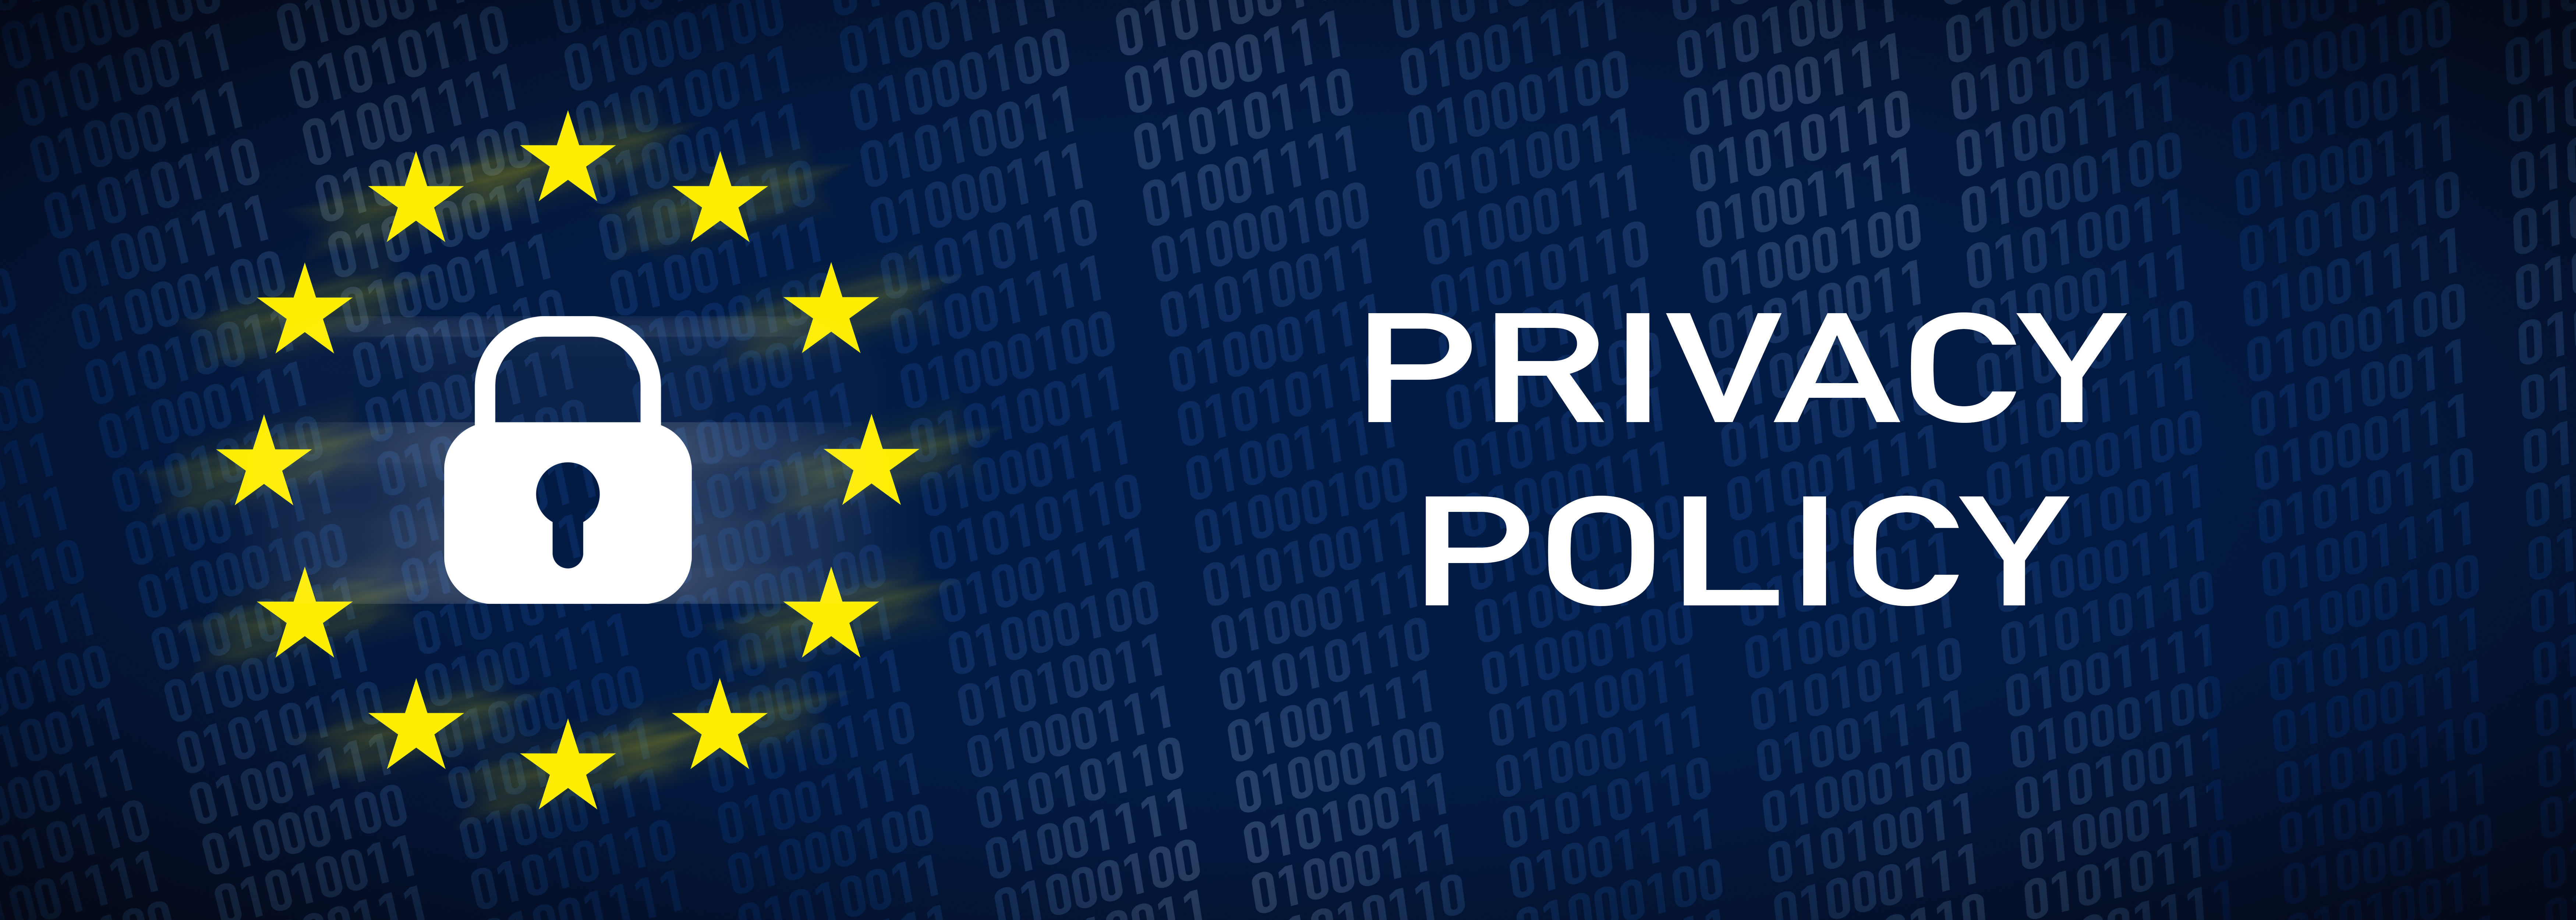 privacy-policy-simplified-senior